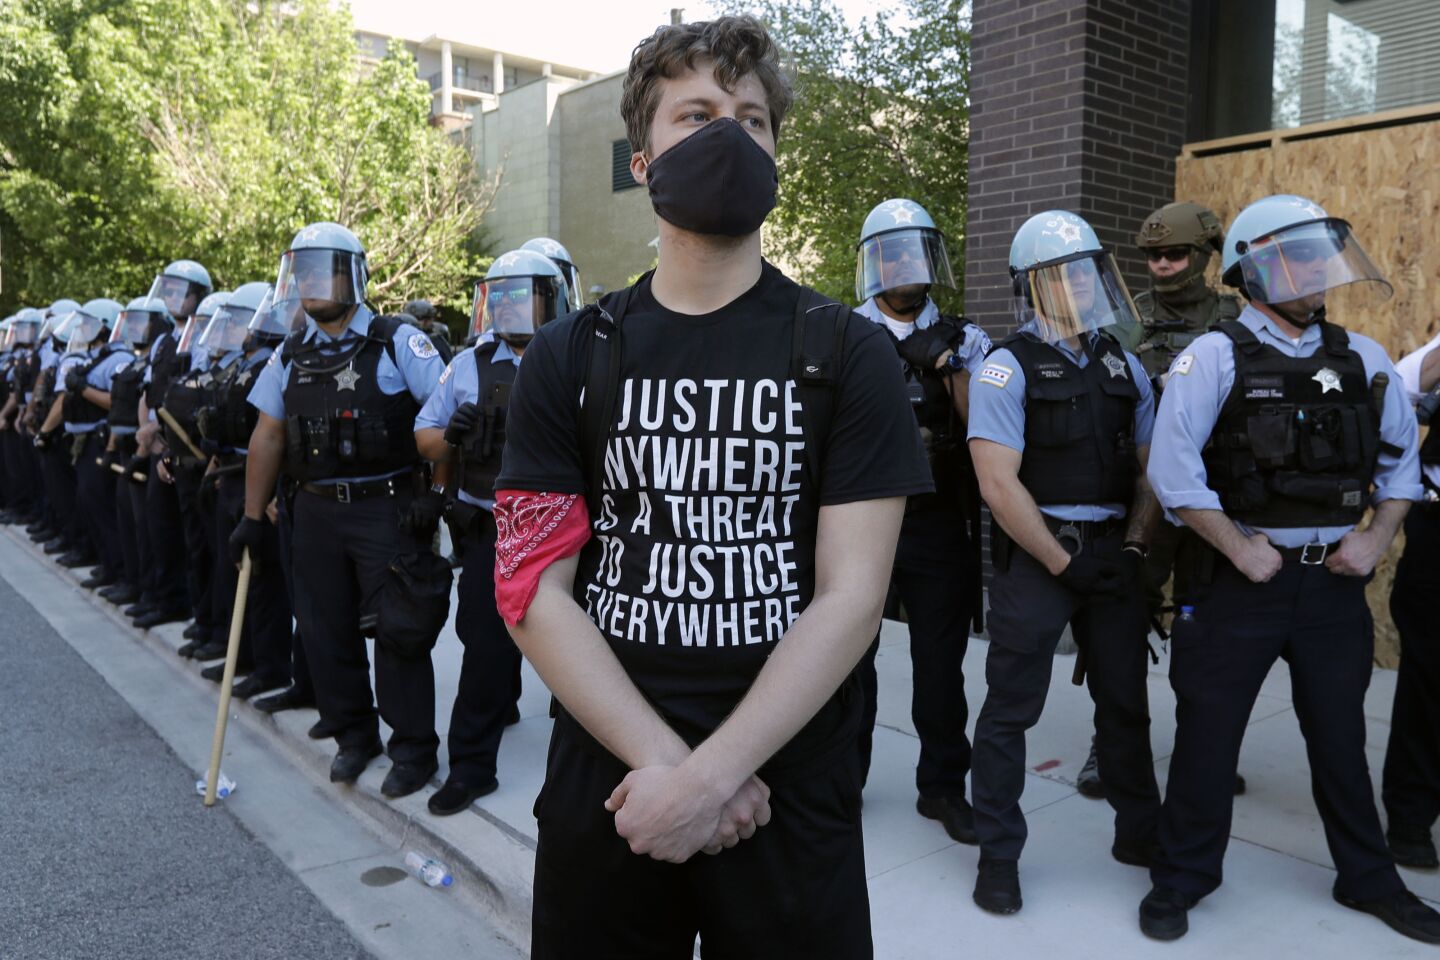 A demonstrator stands in front of Chicago Police officers during the March for Justice in honor of George Floyd Saturday, June 6, 2020, in Chicago. Demonstrators who gathered at Union Park marched through the city's West Side on Saturday afternoon, as the city prepared for another weekend of rallies. (AP Photo/Nam Y. Huh)